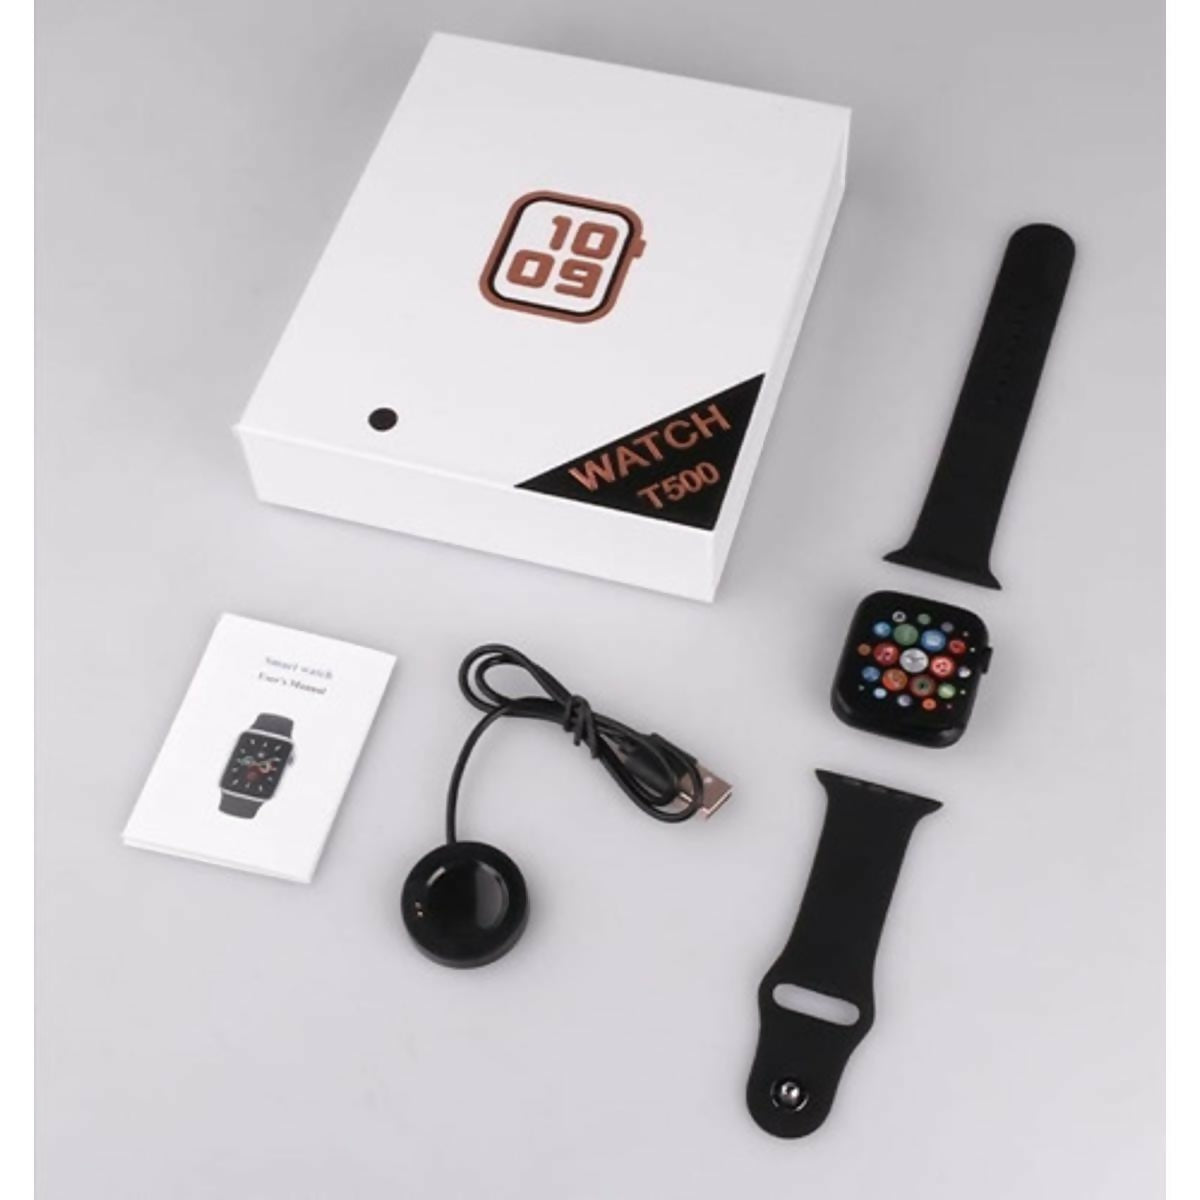 SMART WATCH T-500 BLUETOOTH RECTANGULAR SHAPE GOOD QUALITY WITH FREE SILICON BAND